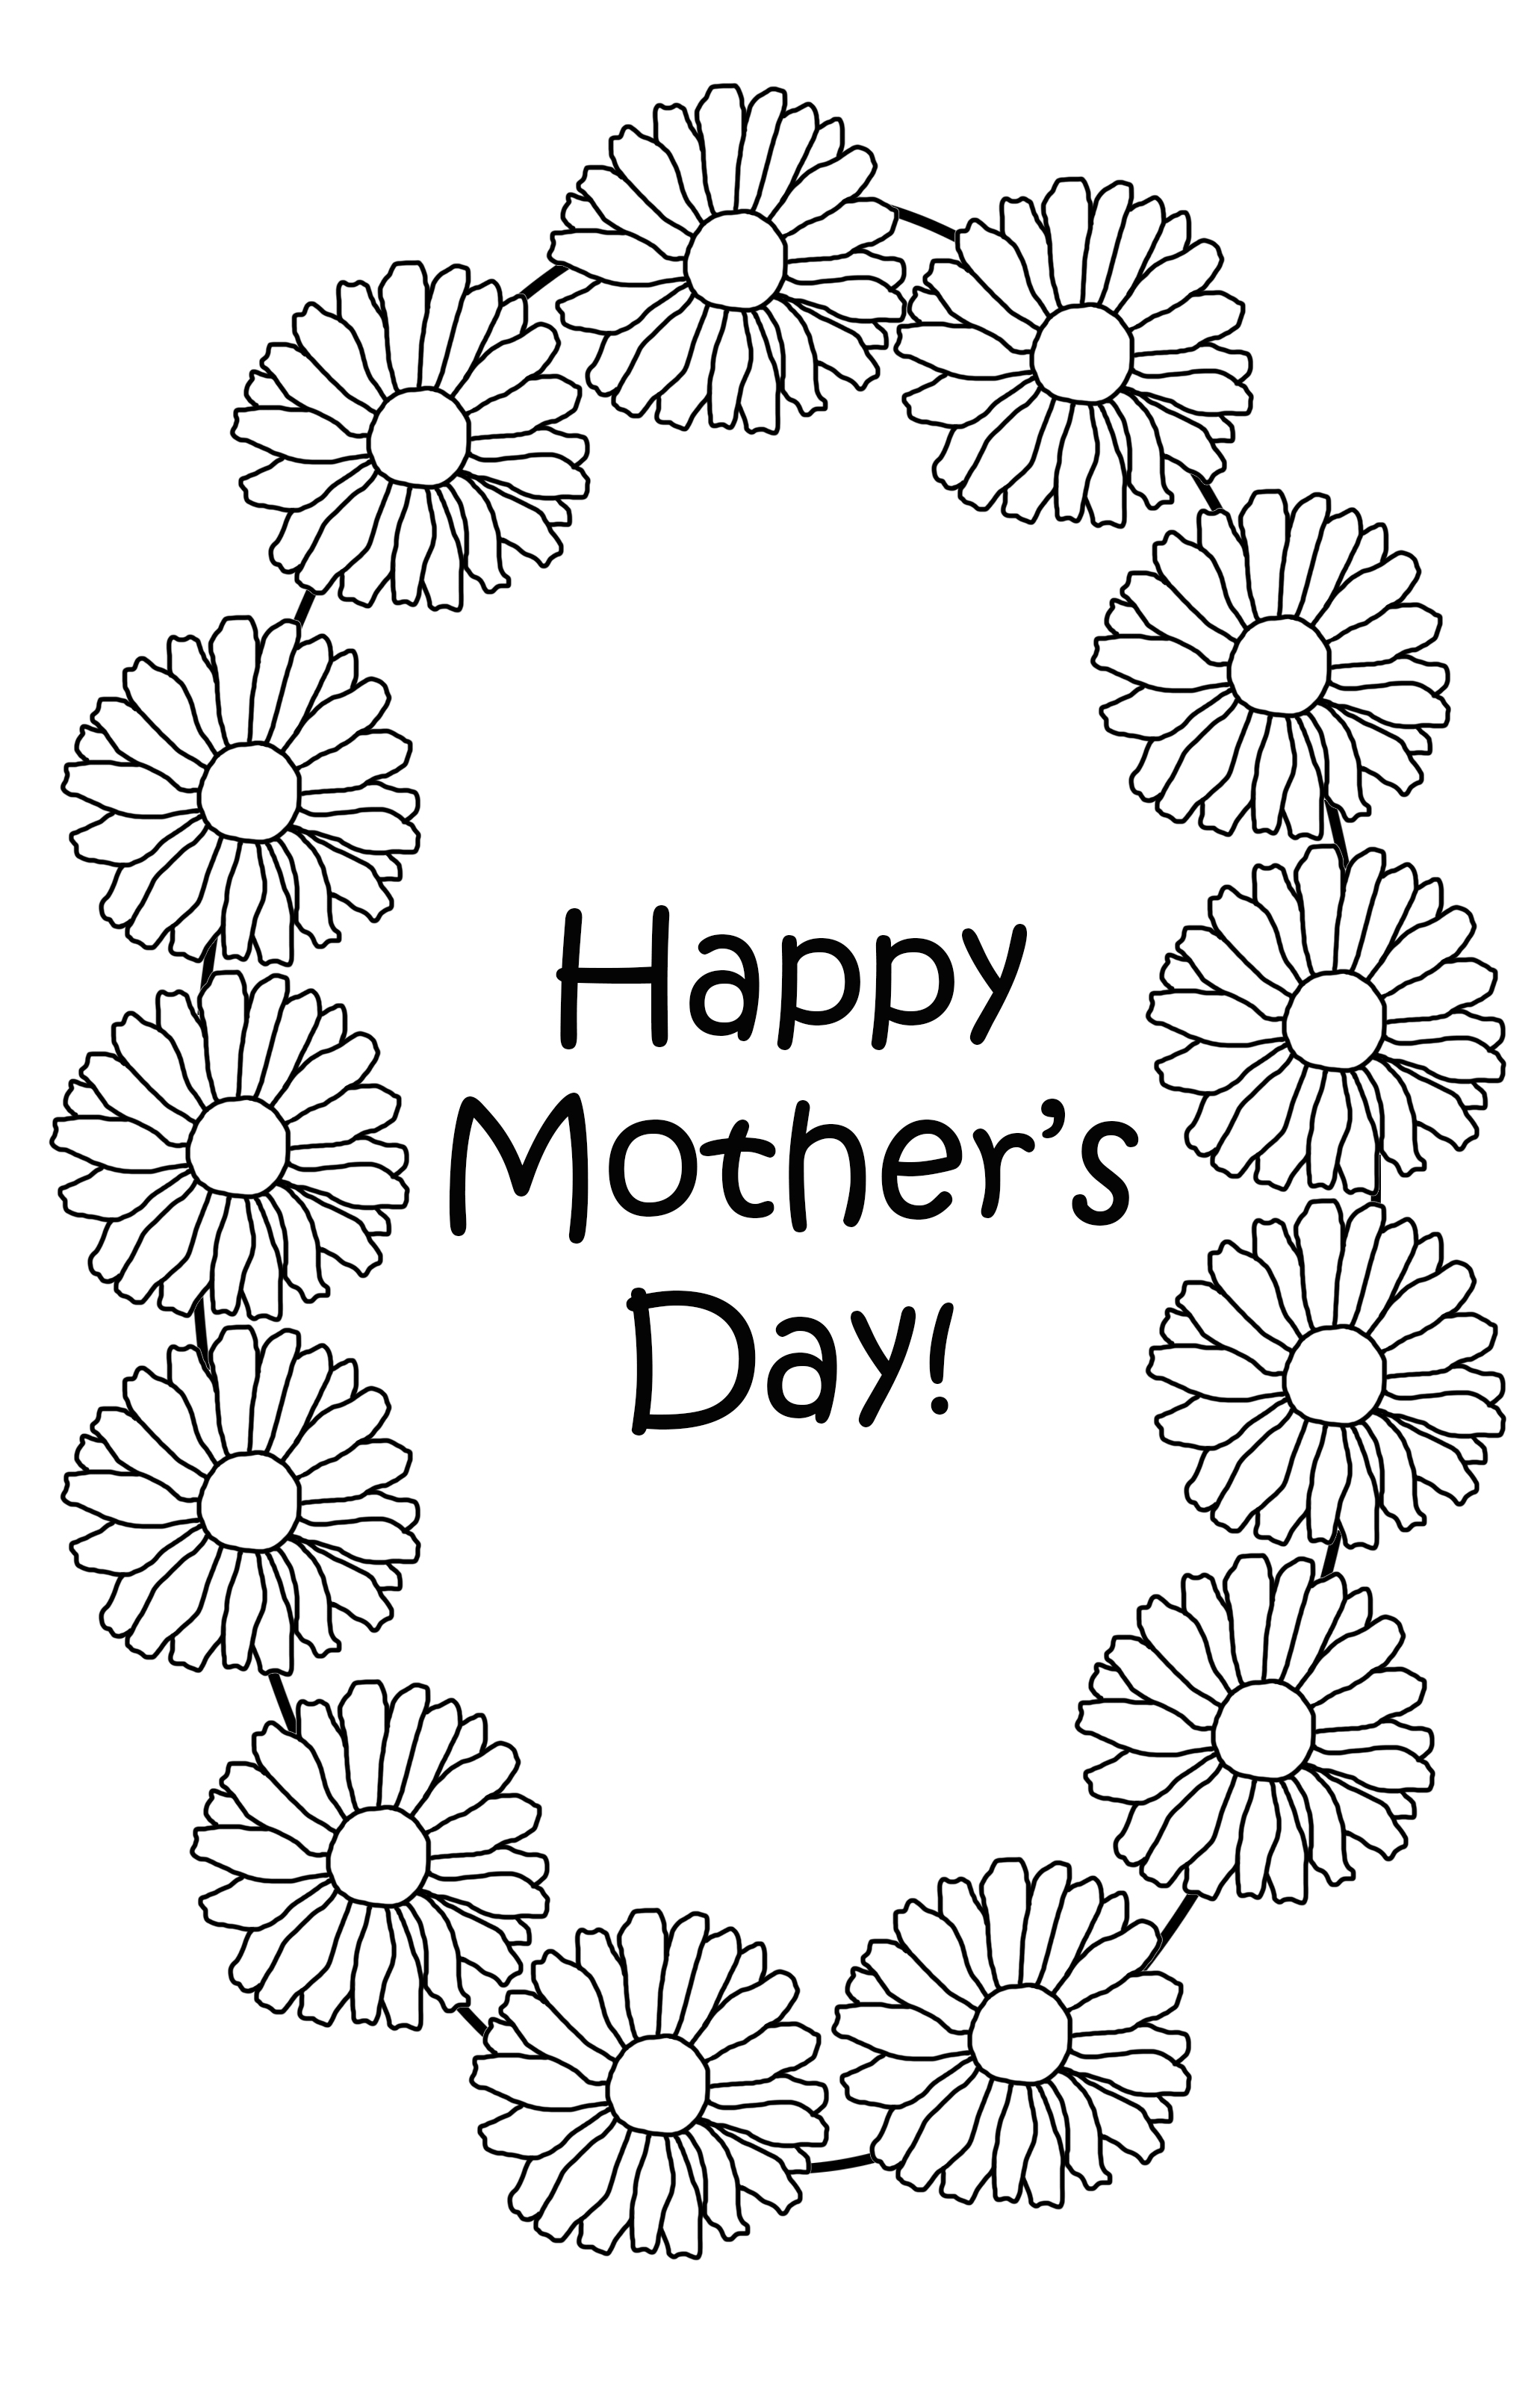 Mother's Day Flower Card • Easy Mother's Day Art Activity • Roll A Flower | Mother's  day diy, Diy mothers day gifts, Flowers for mom